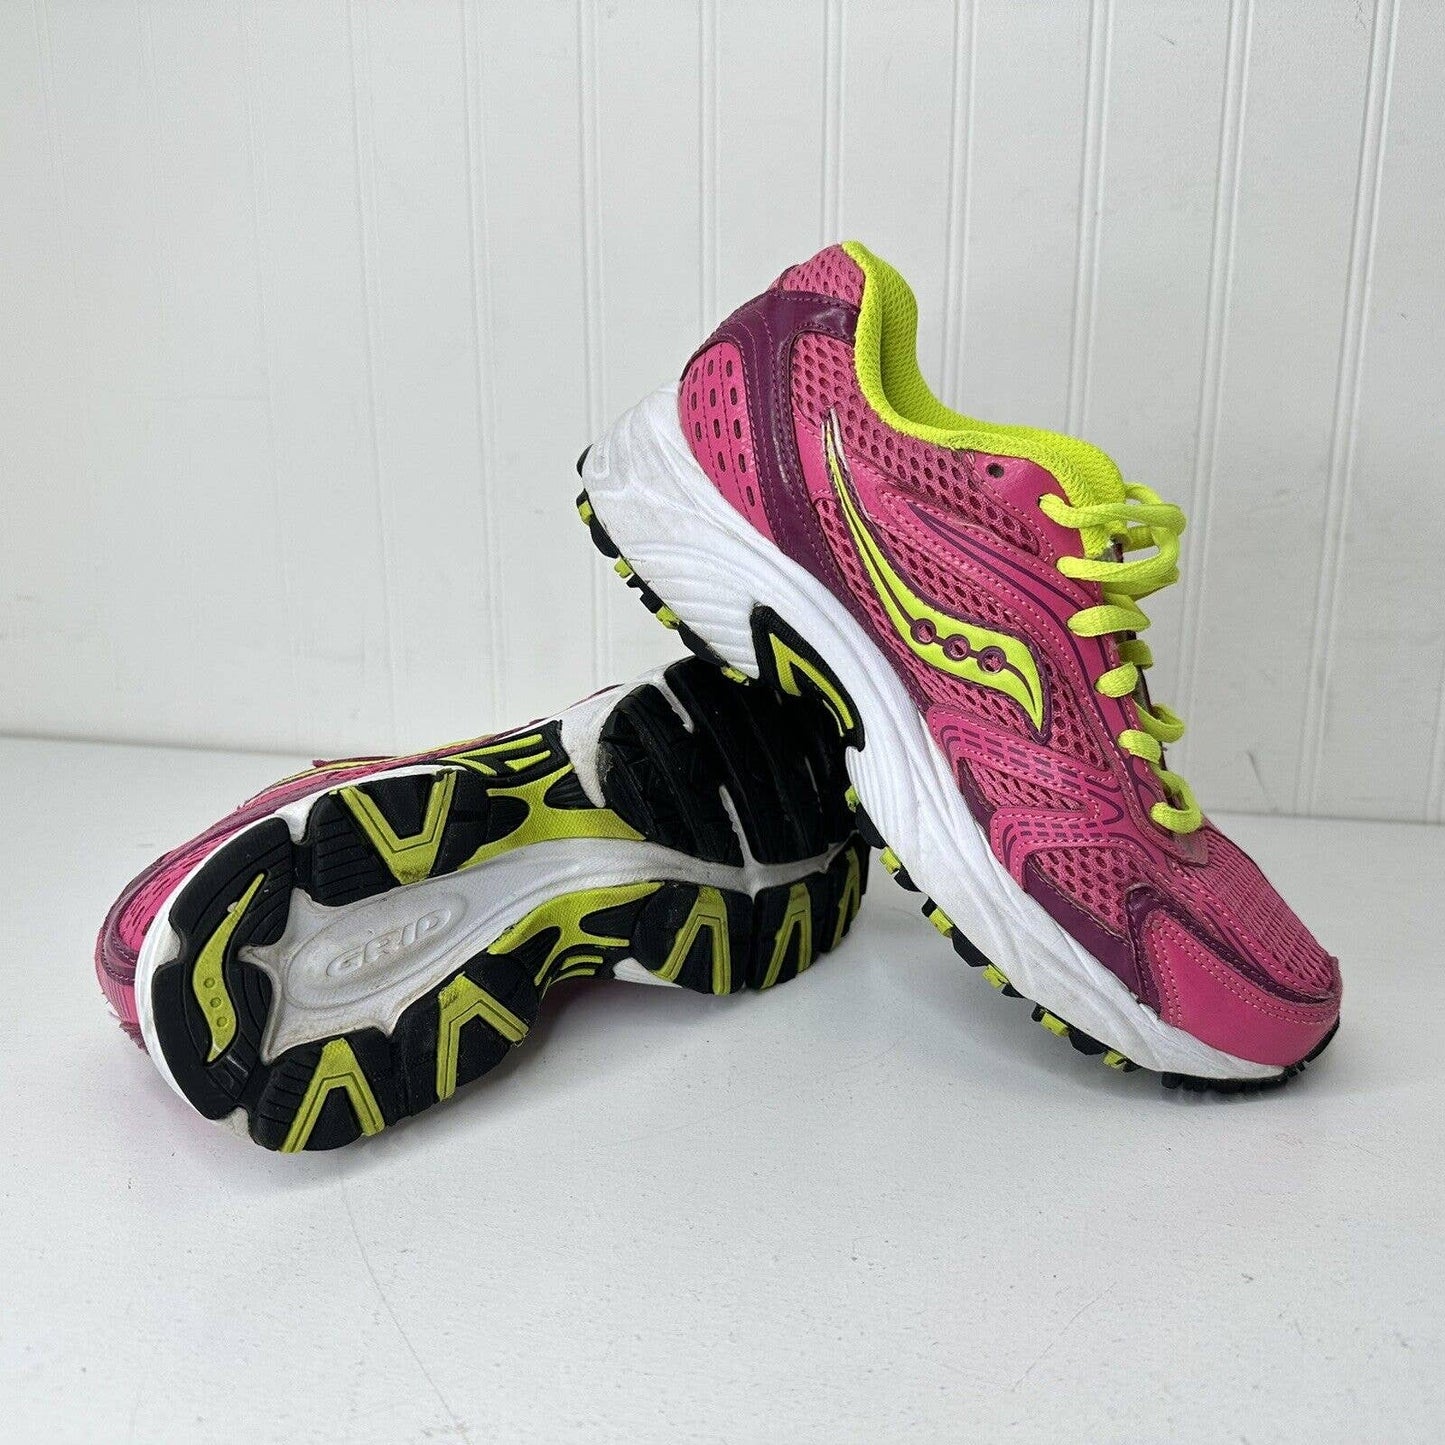 Saucony Oasis Womens Shoes Sneakers Size 7 Pink Yellow 15096-20 Running Athletic